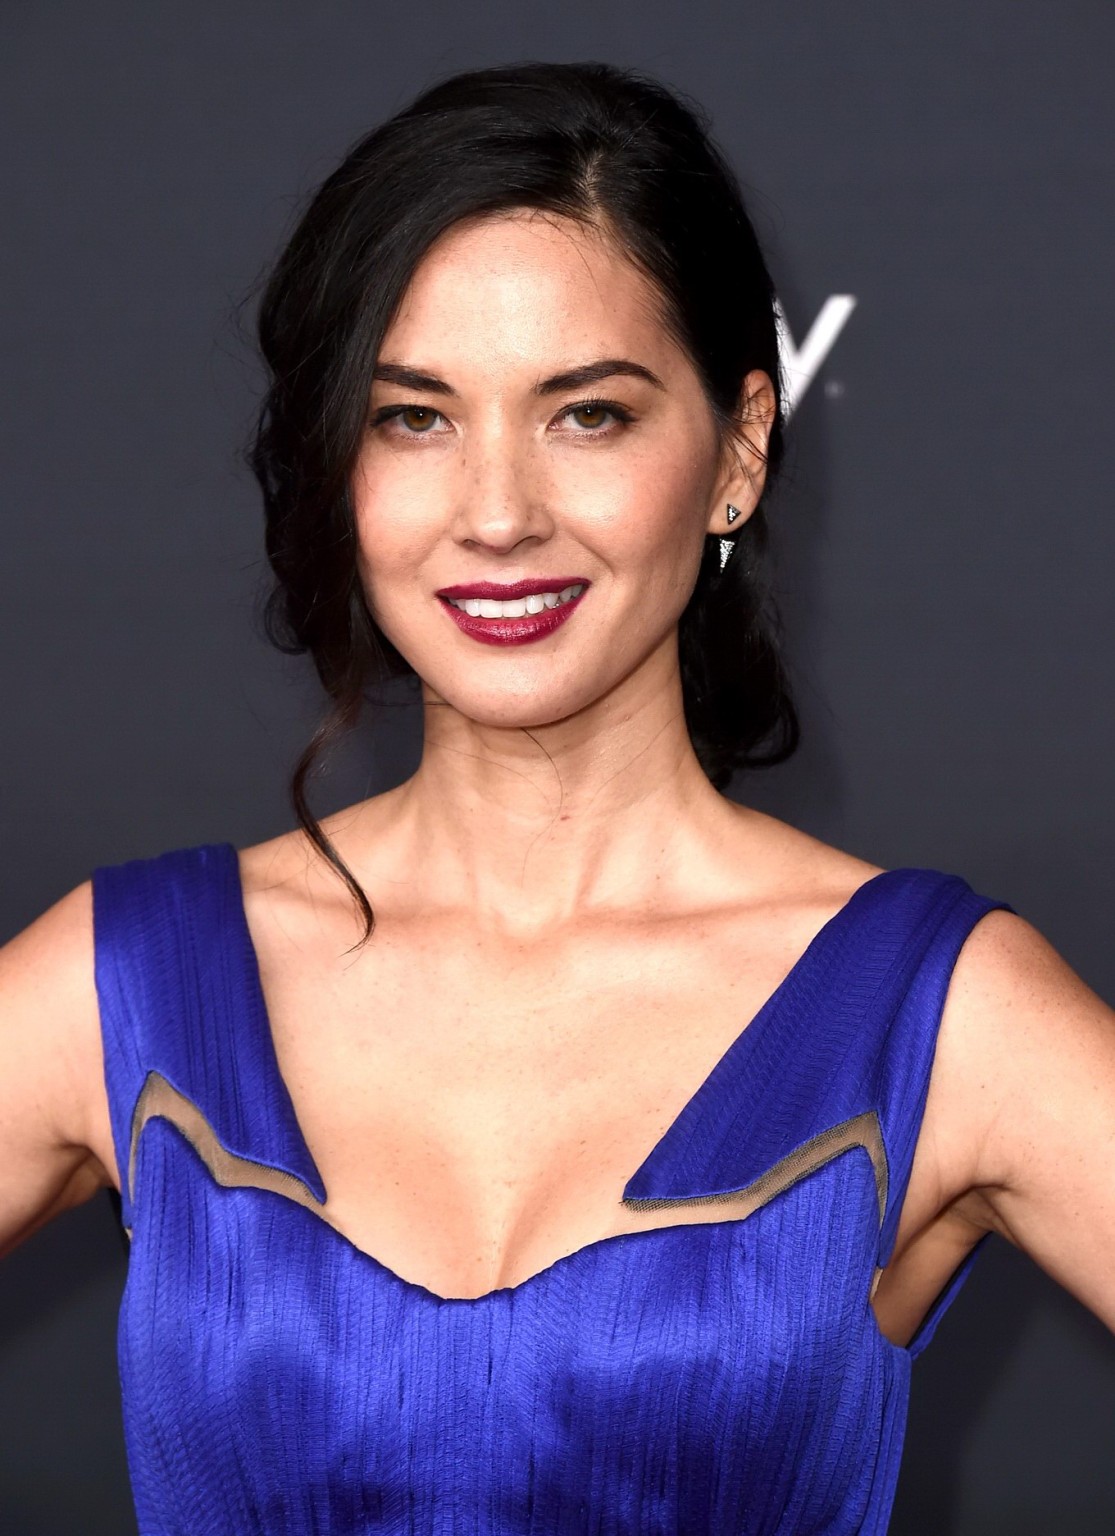 Olivia Munn wearing a low cut blue dress at the 4th annual NFL Honors in Phoenix #75173734